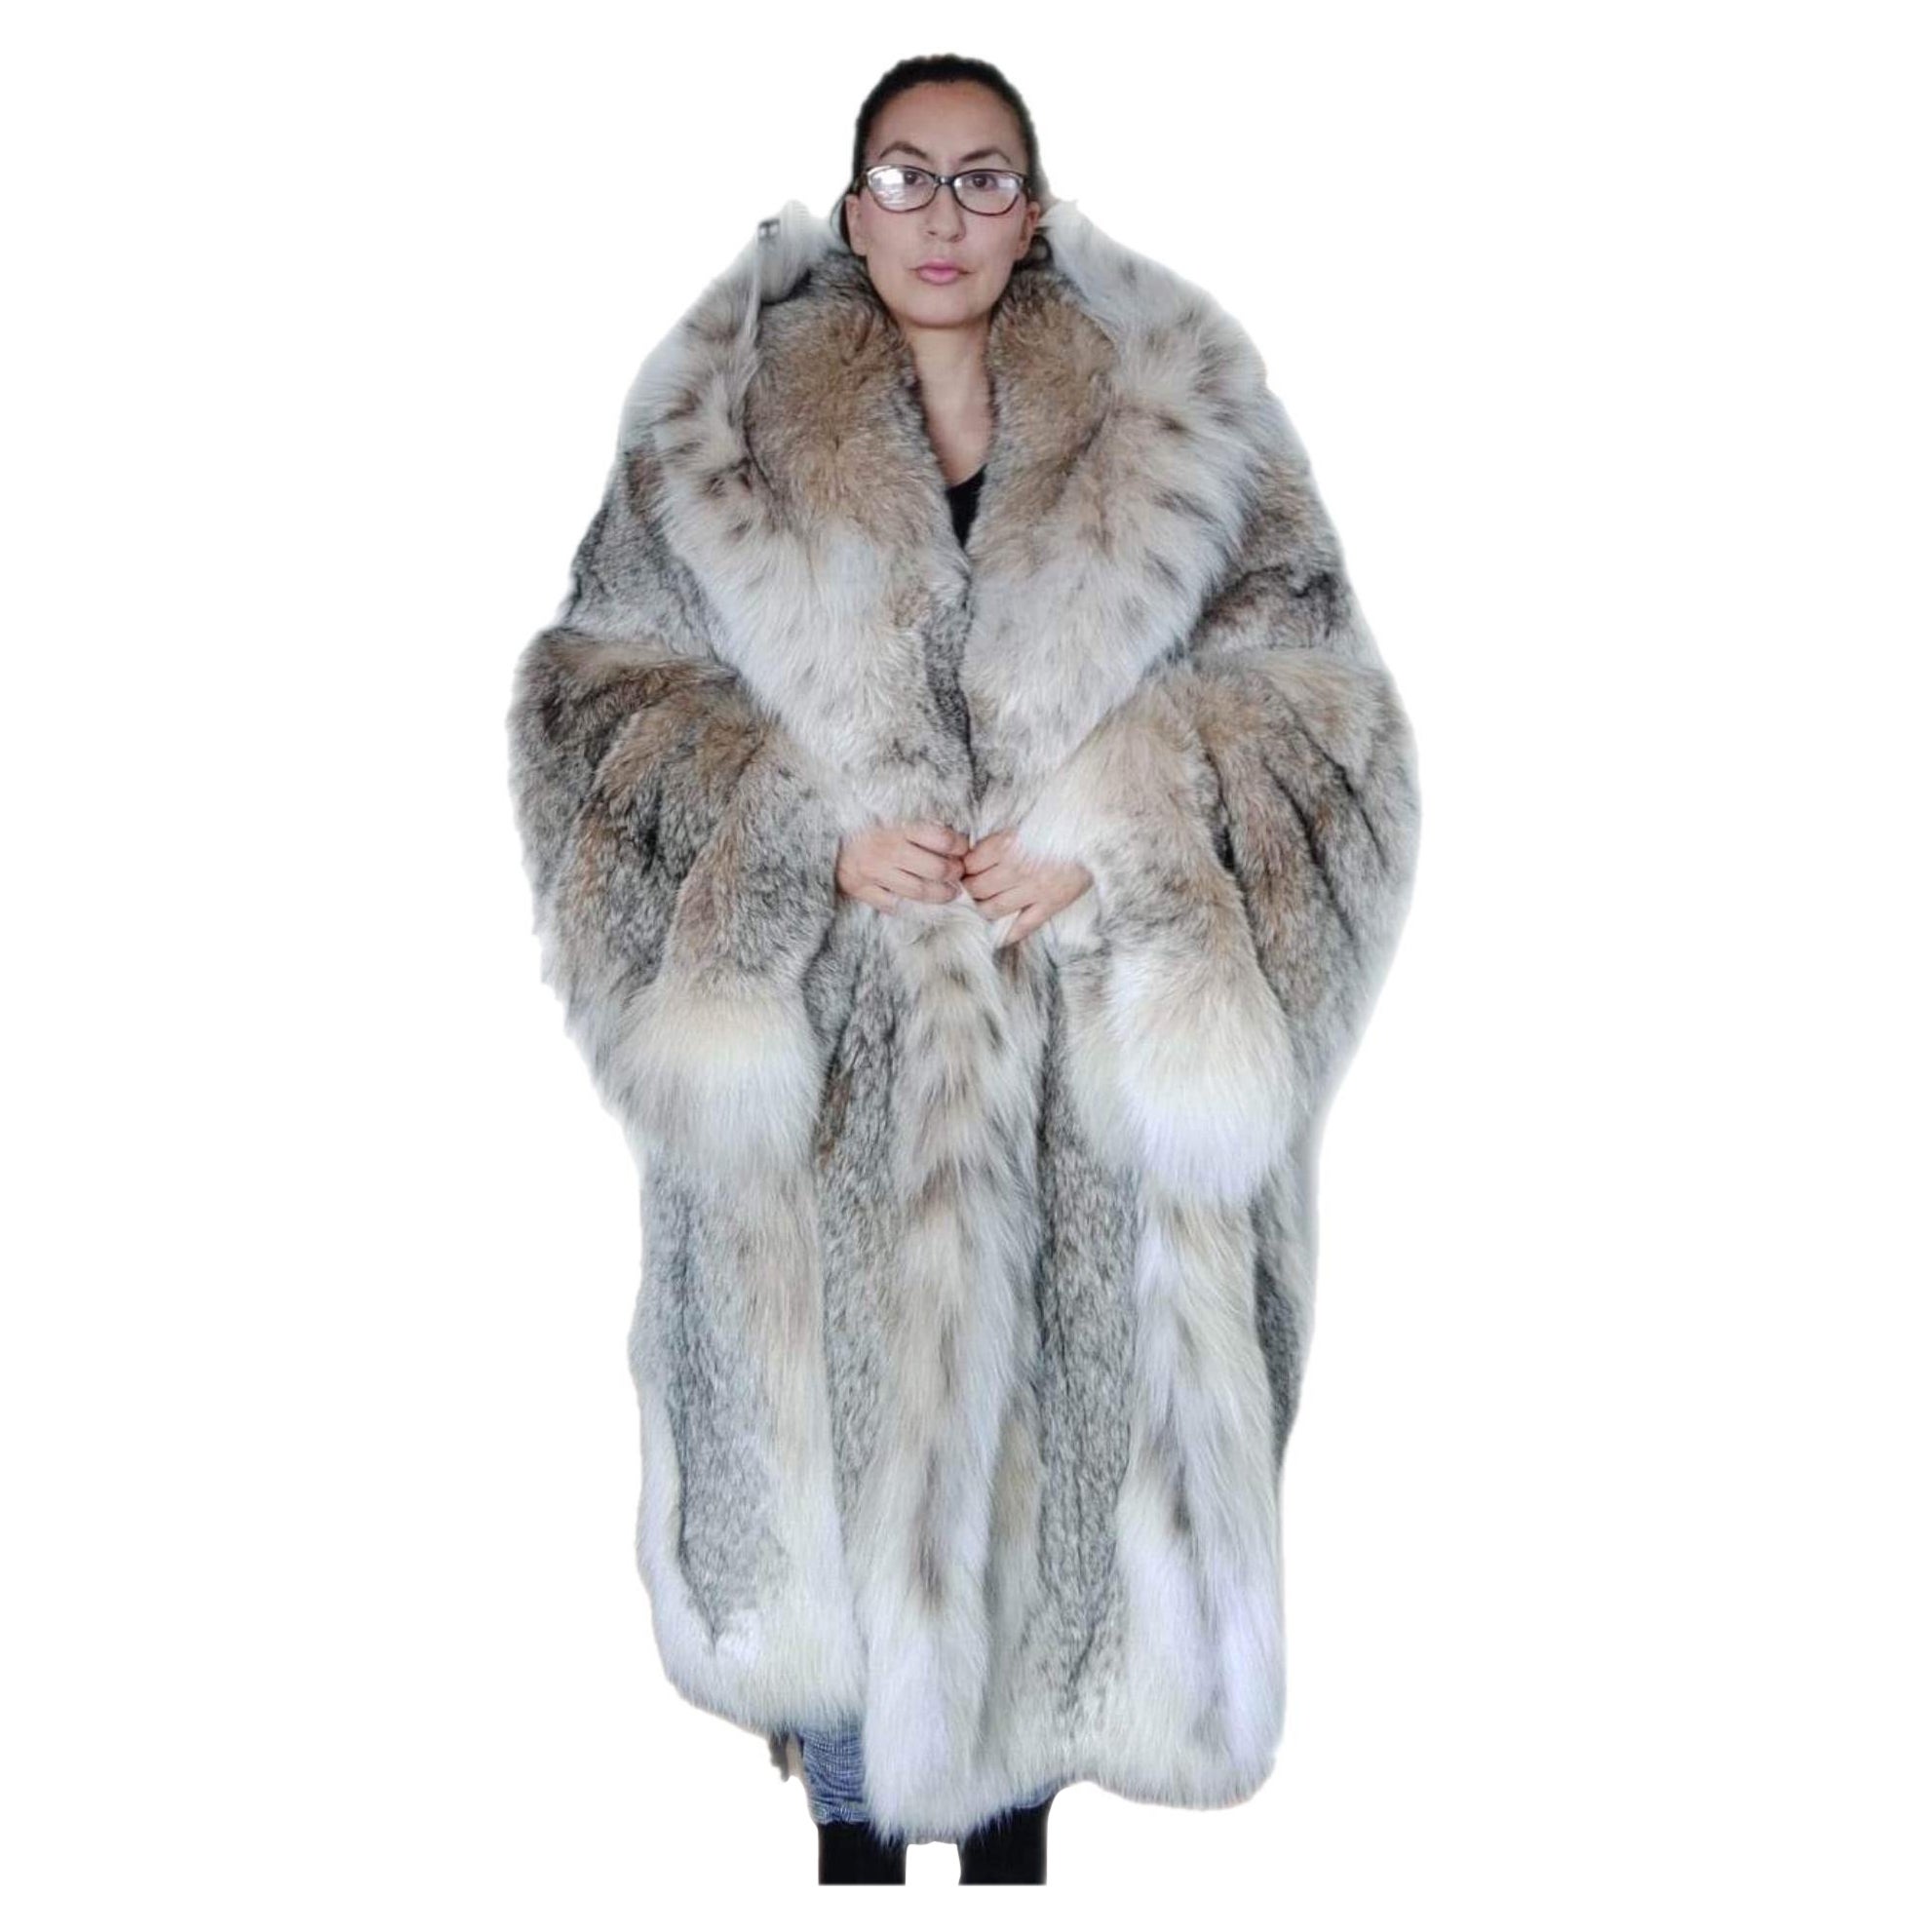 Brand new lightweight Canadian lynx fur coat with detachable hood size 24 XXL For Sale